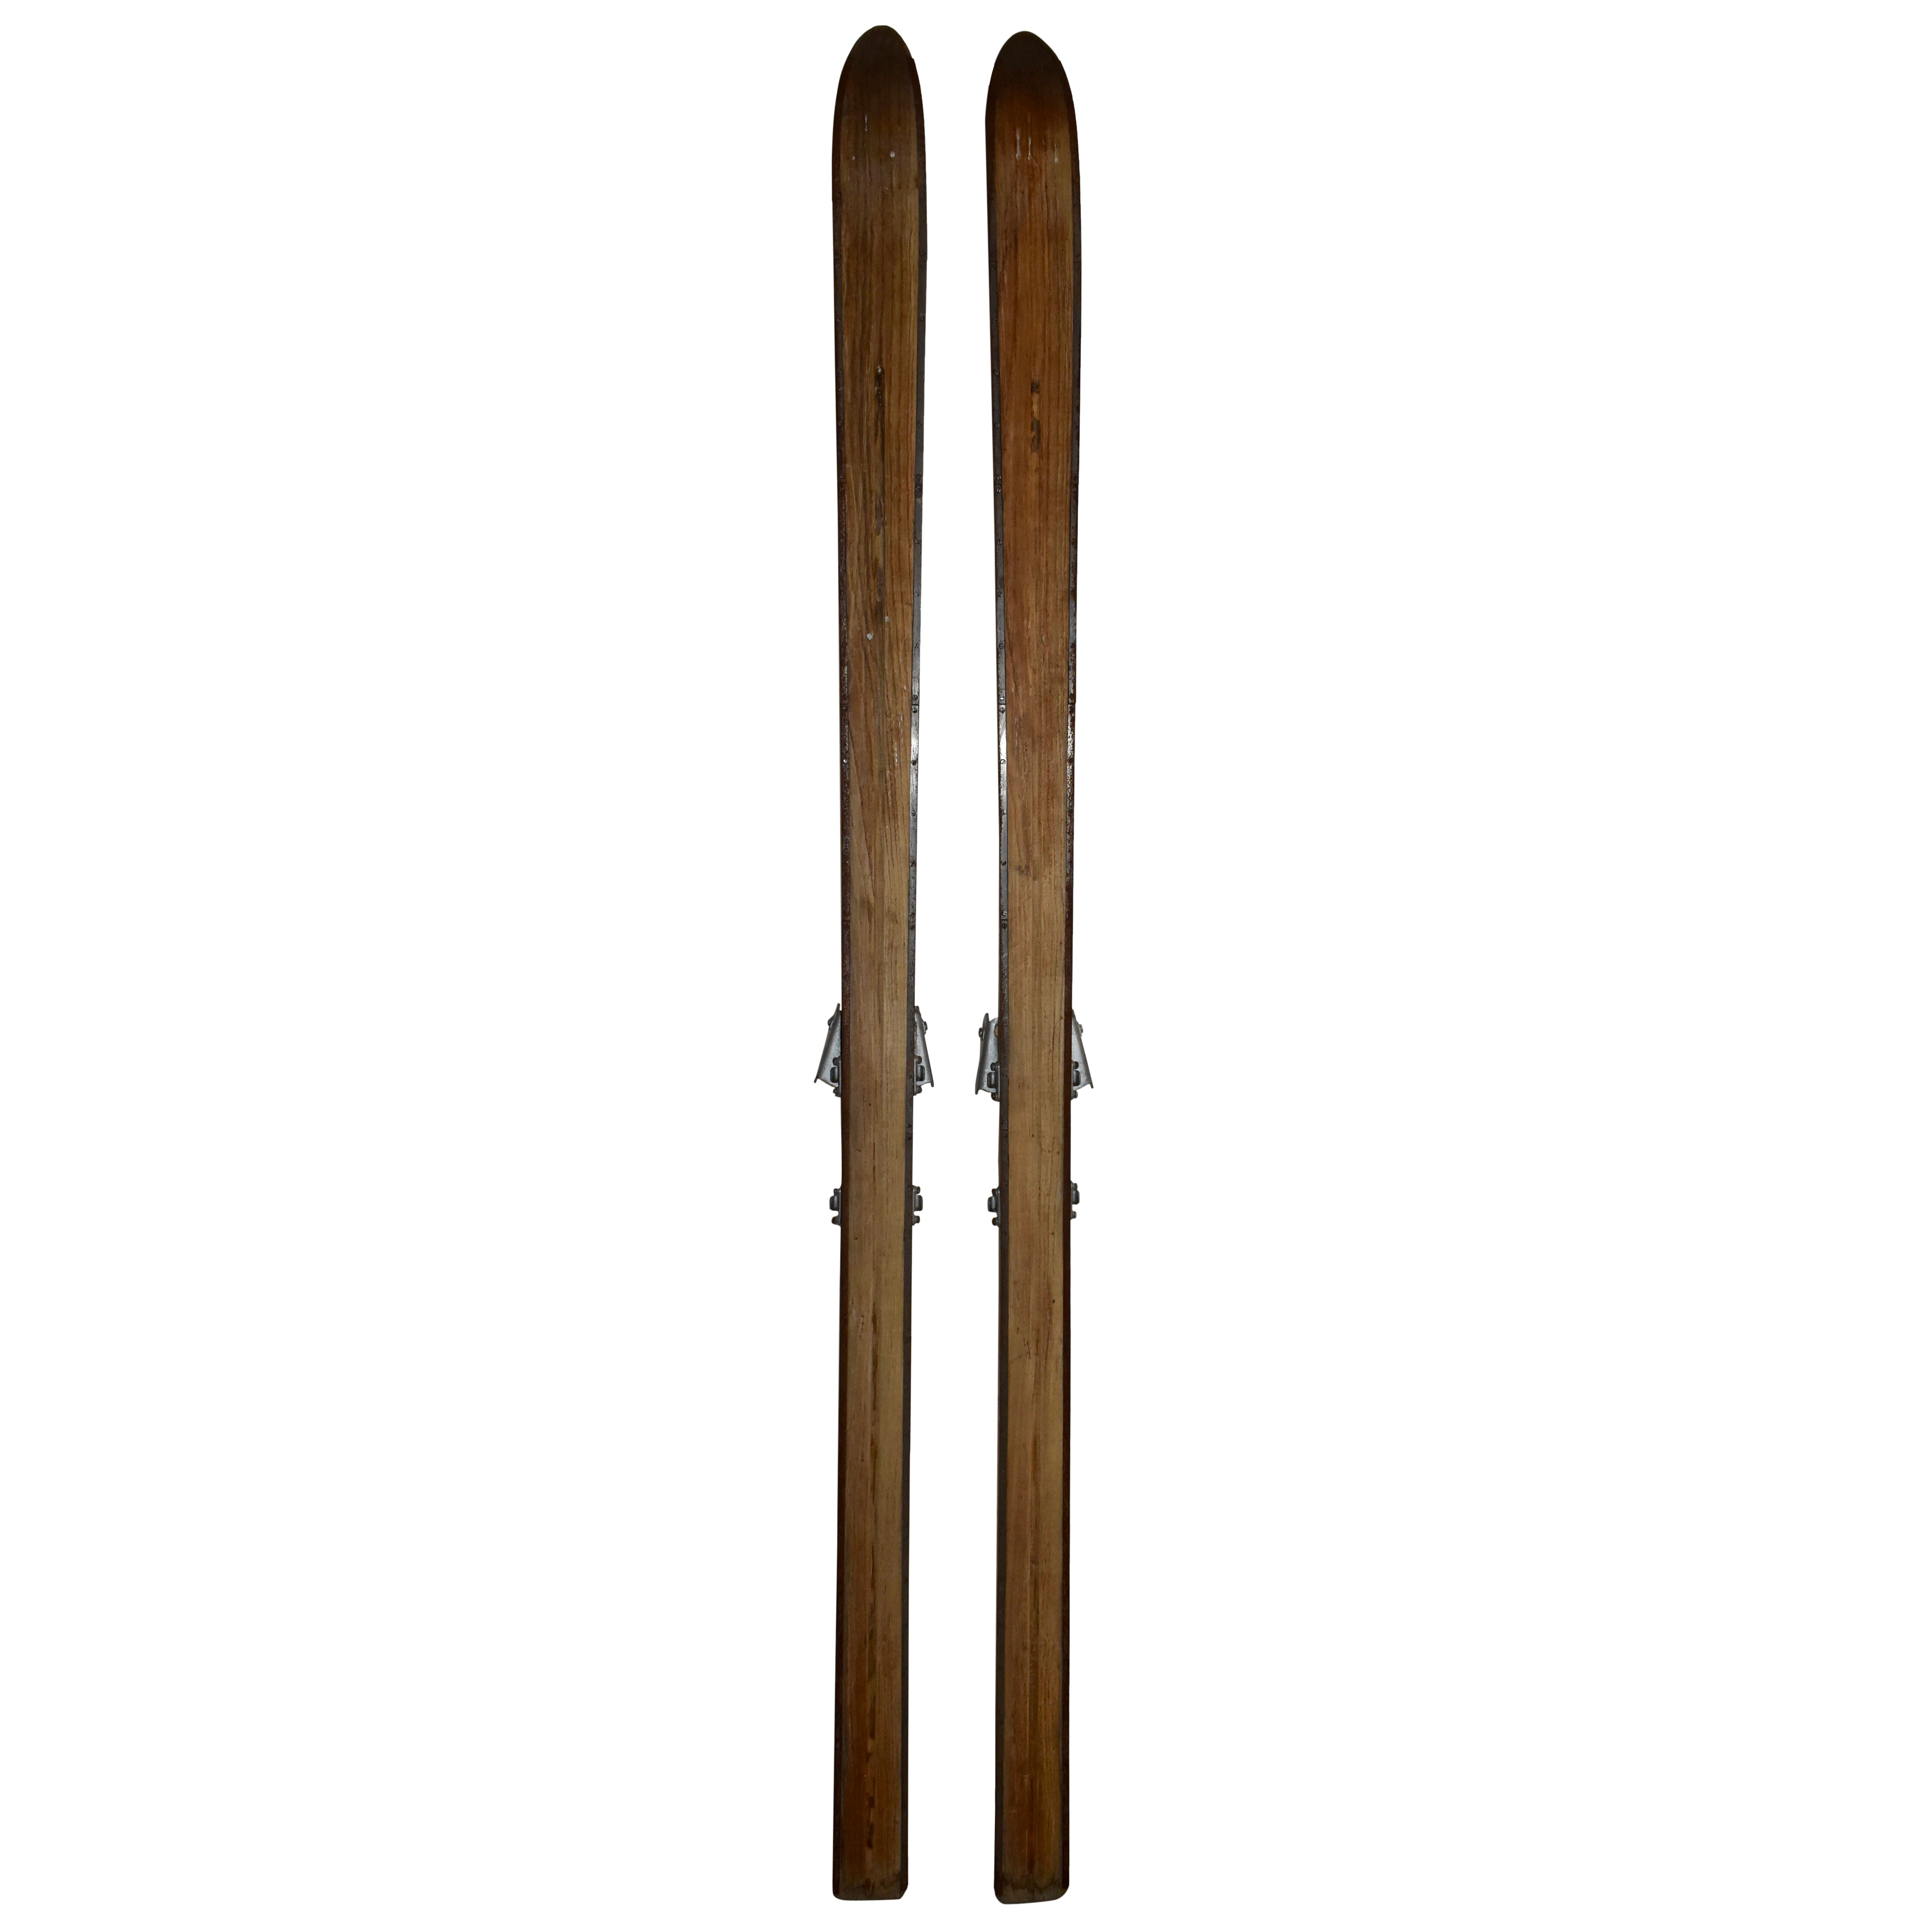 Wooden Skis with Massag Bindings